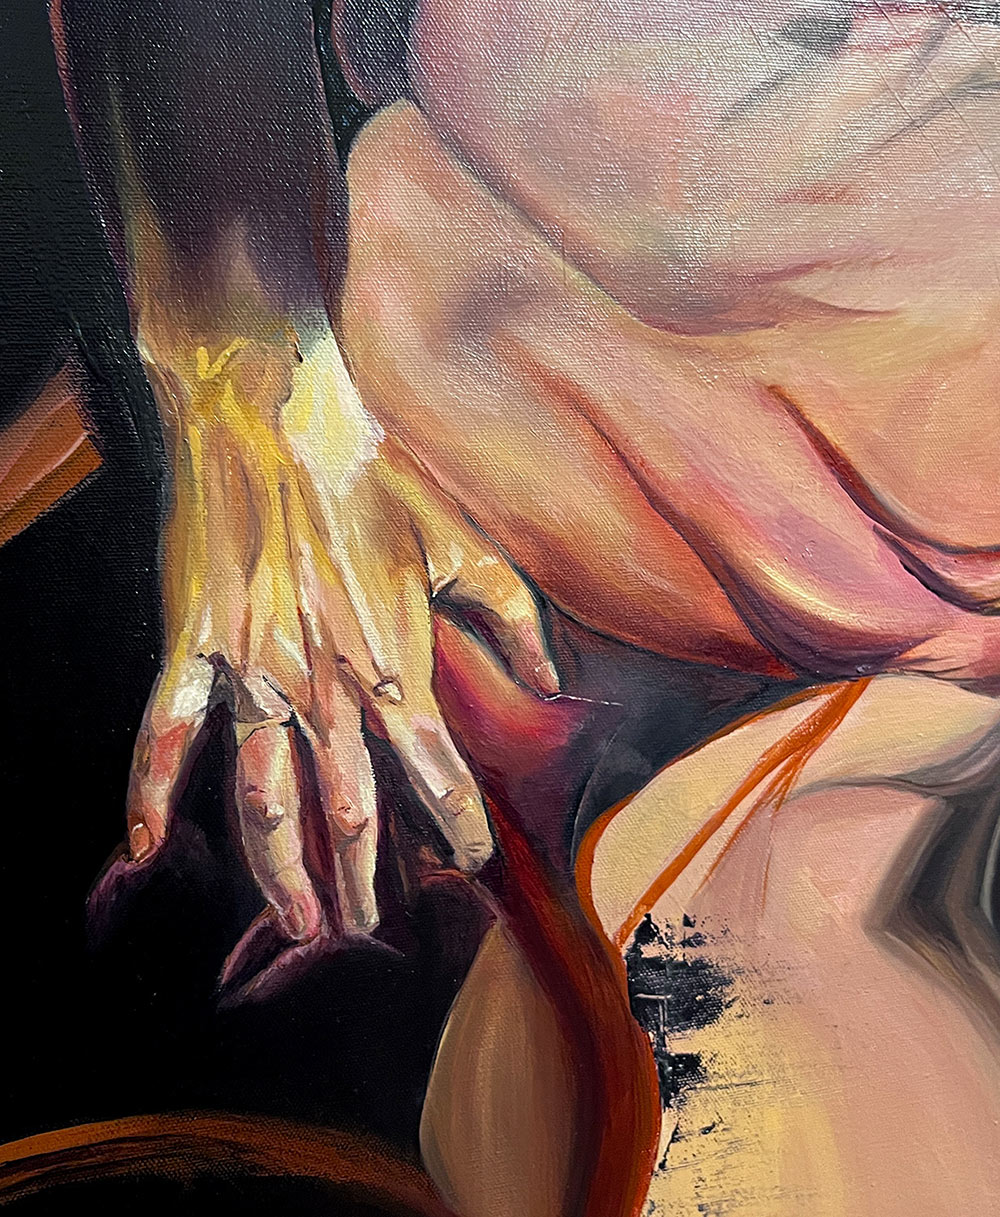 detail of painting of hand and body